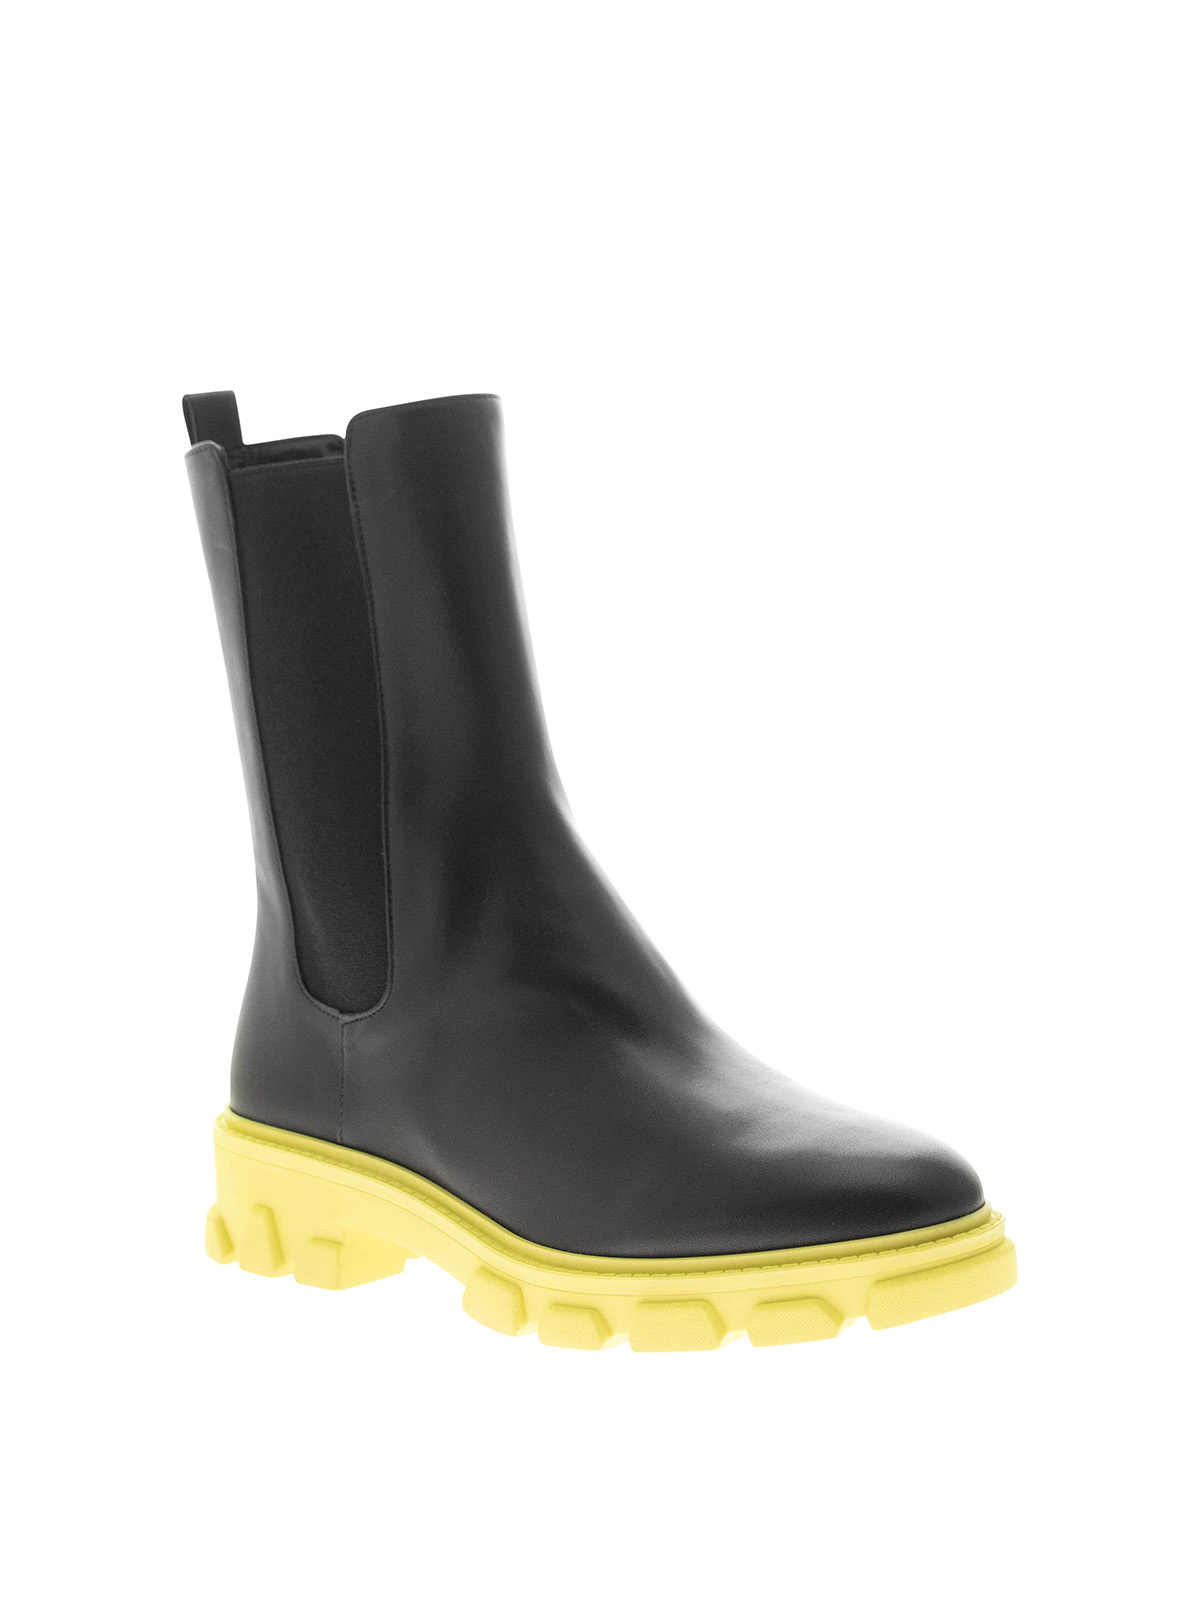 MICHAEL MICHAEL KORS Ridley leather Chelsea boots  Sale up to 70 off   THE OUTNET